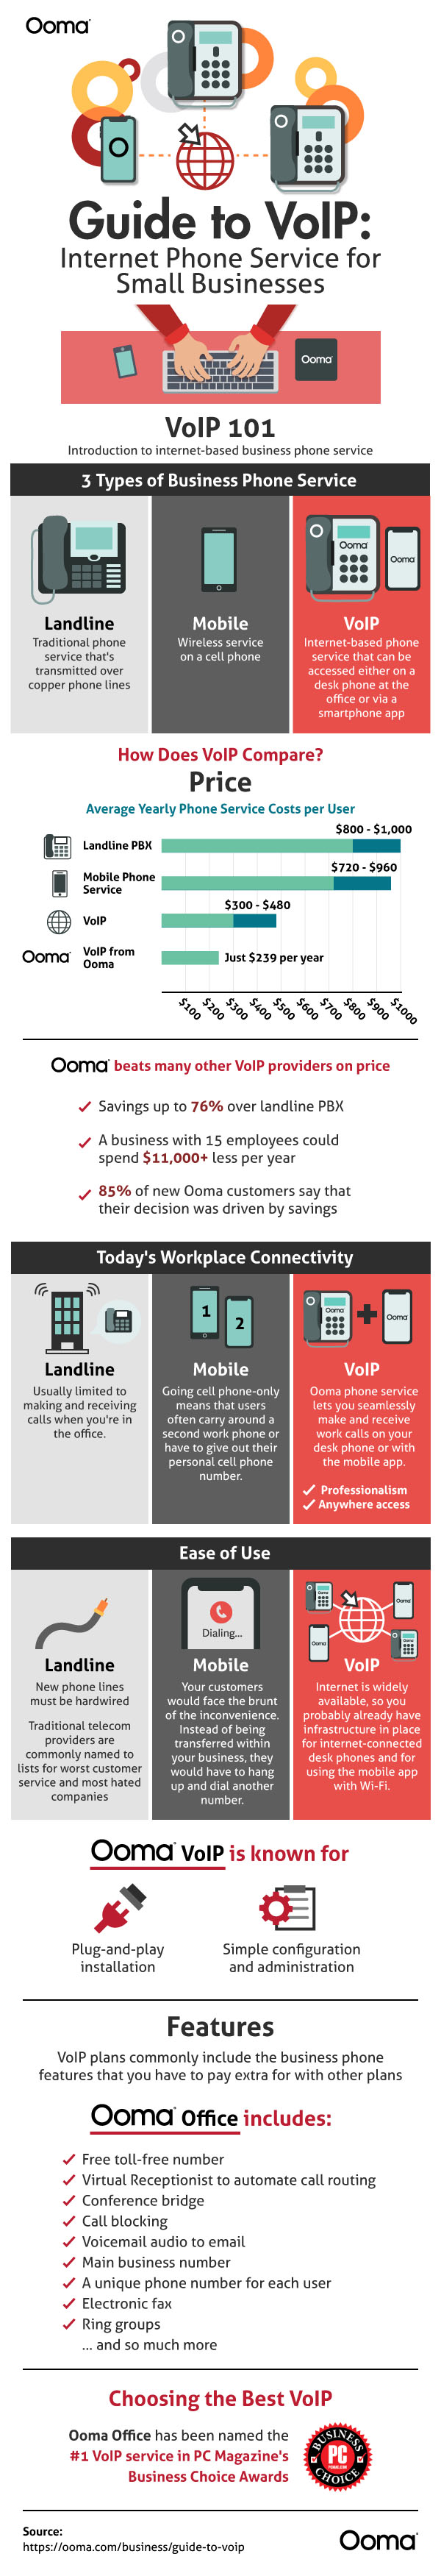 VoIP guide infographic